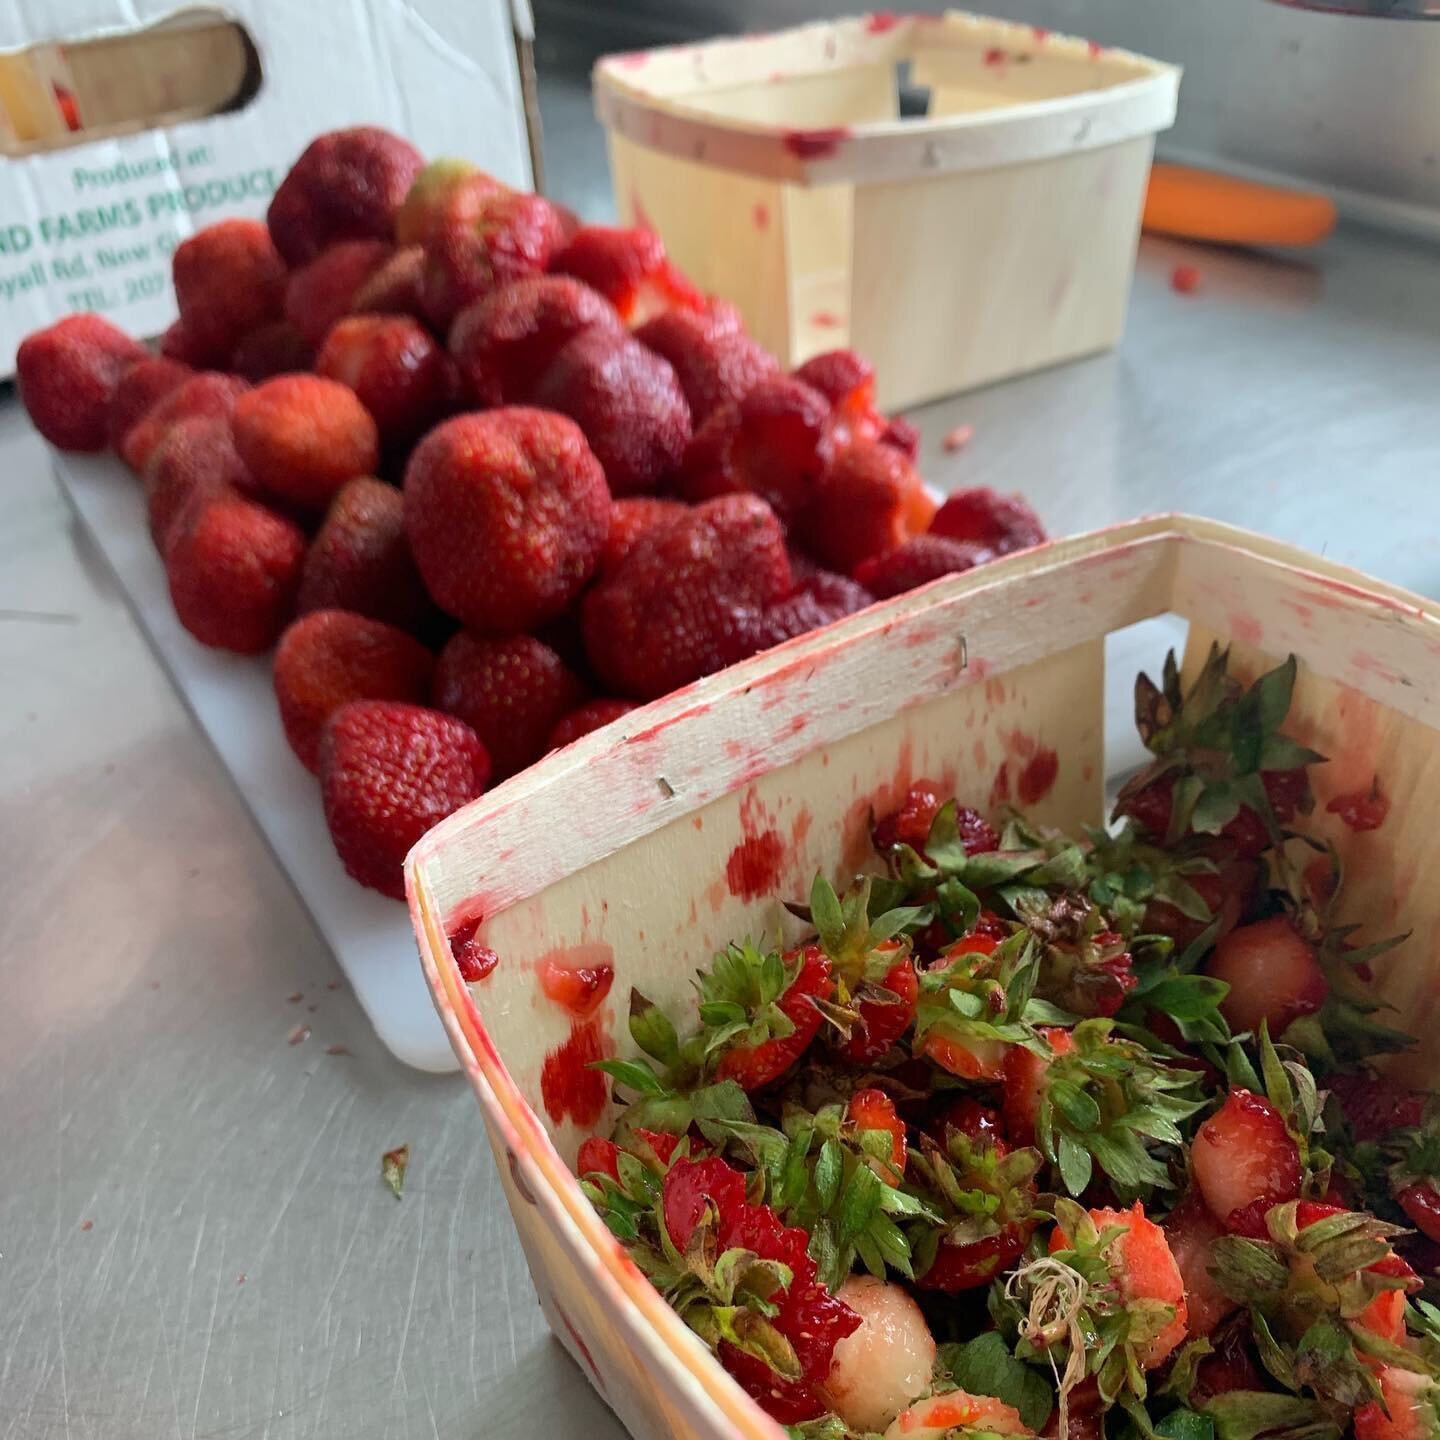 Be on the lookout for our strawberry pies at the upcoming markets 🍓 Made by our very own Lynn Piper, all of our pies are handmade using the very same fruits, veggies, and meat we sell right at our booth .
.
.
.
.
.
#Strawberries #StrawberryPie #Stra